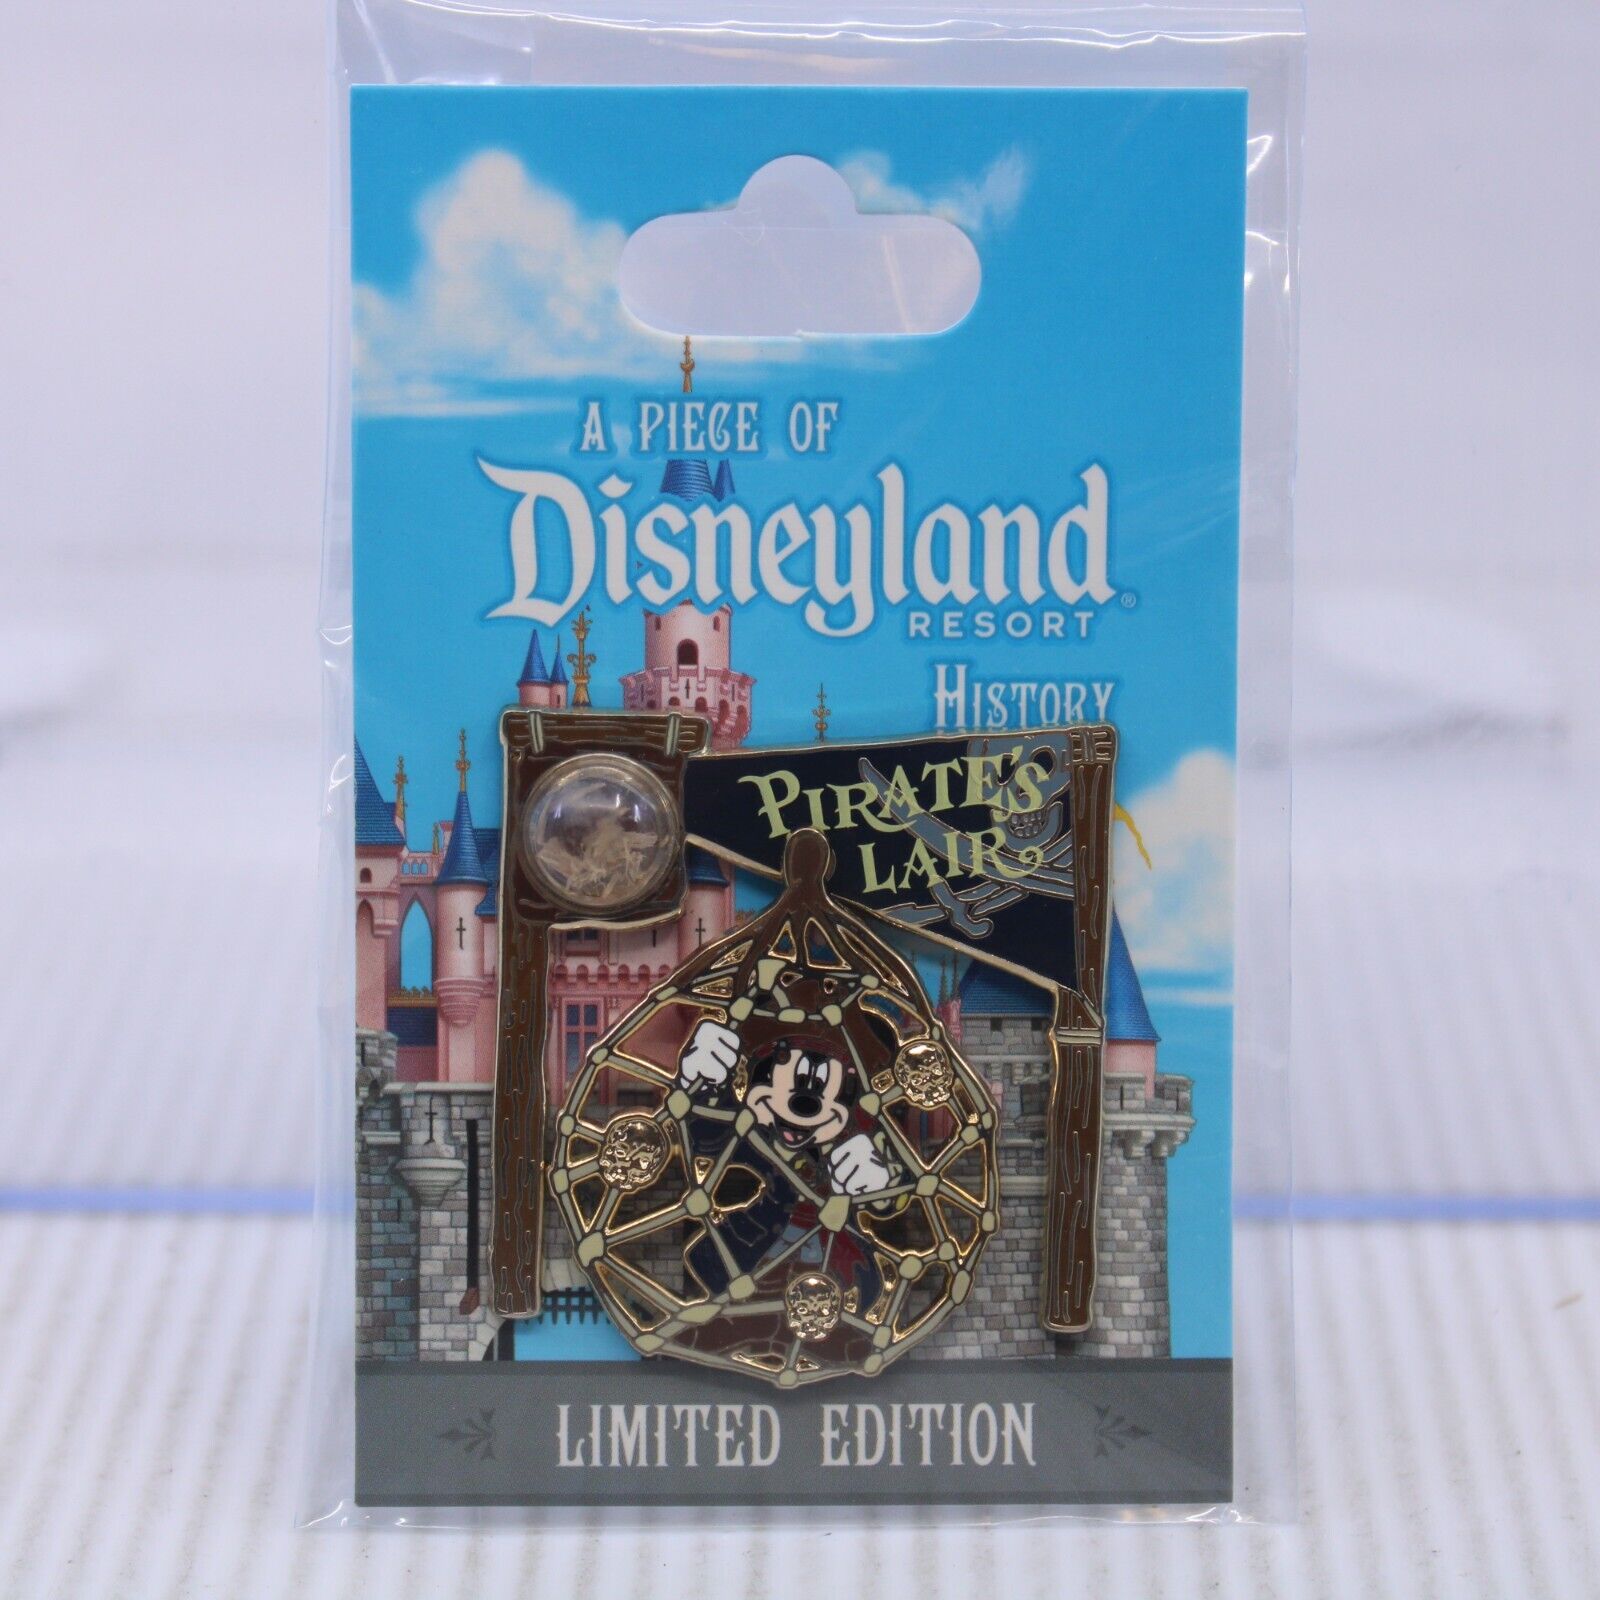 C2 Disney DLR LE Pin Piece of History Disneyland Pirates Laid Mickey Mouse